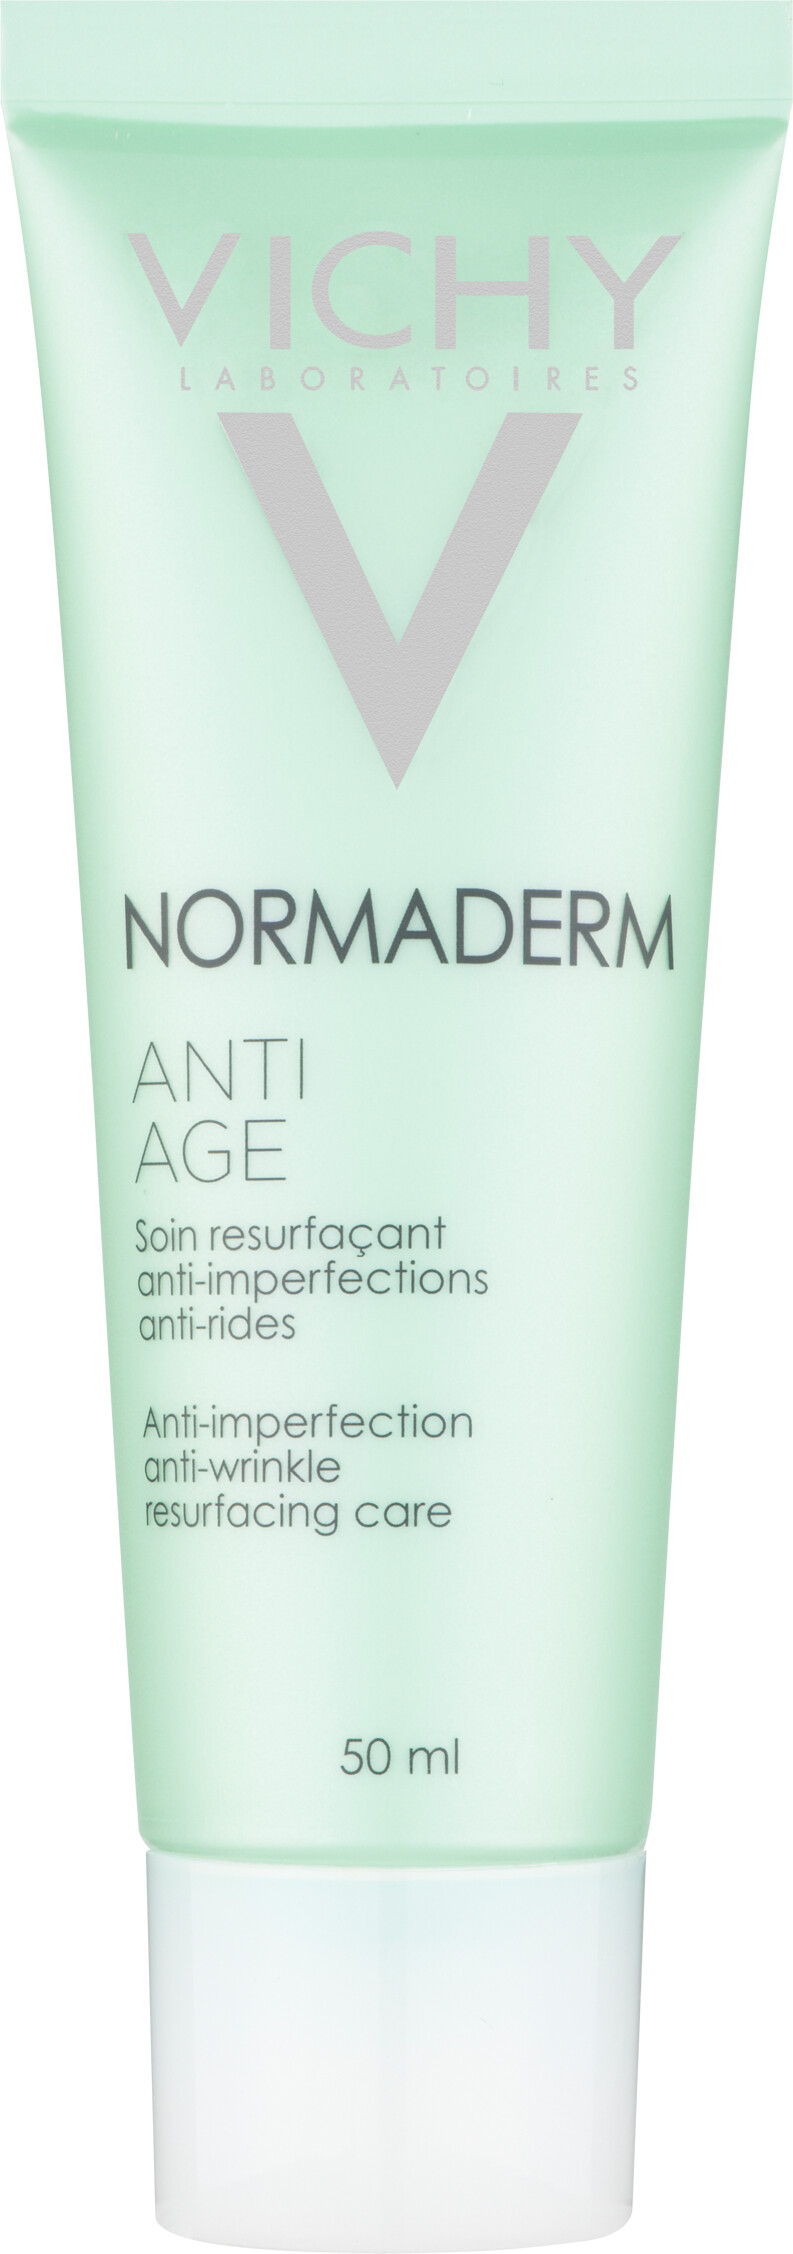 Vichy Normaderm Anti-Age - Anti-Imperfection, Anti-Wrinkle Resurfacing Care 50ml